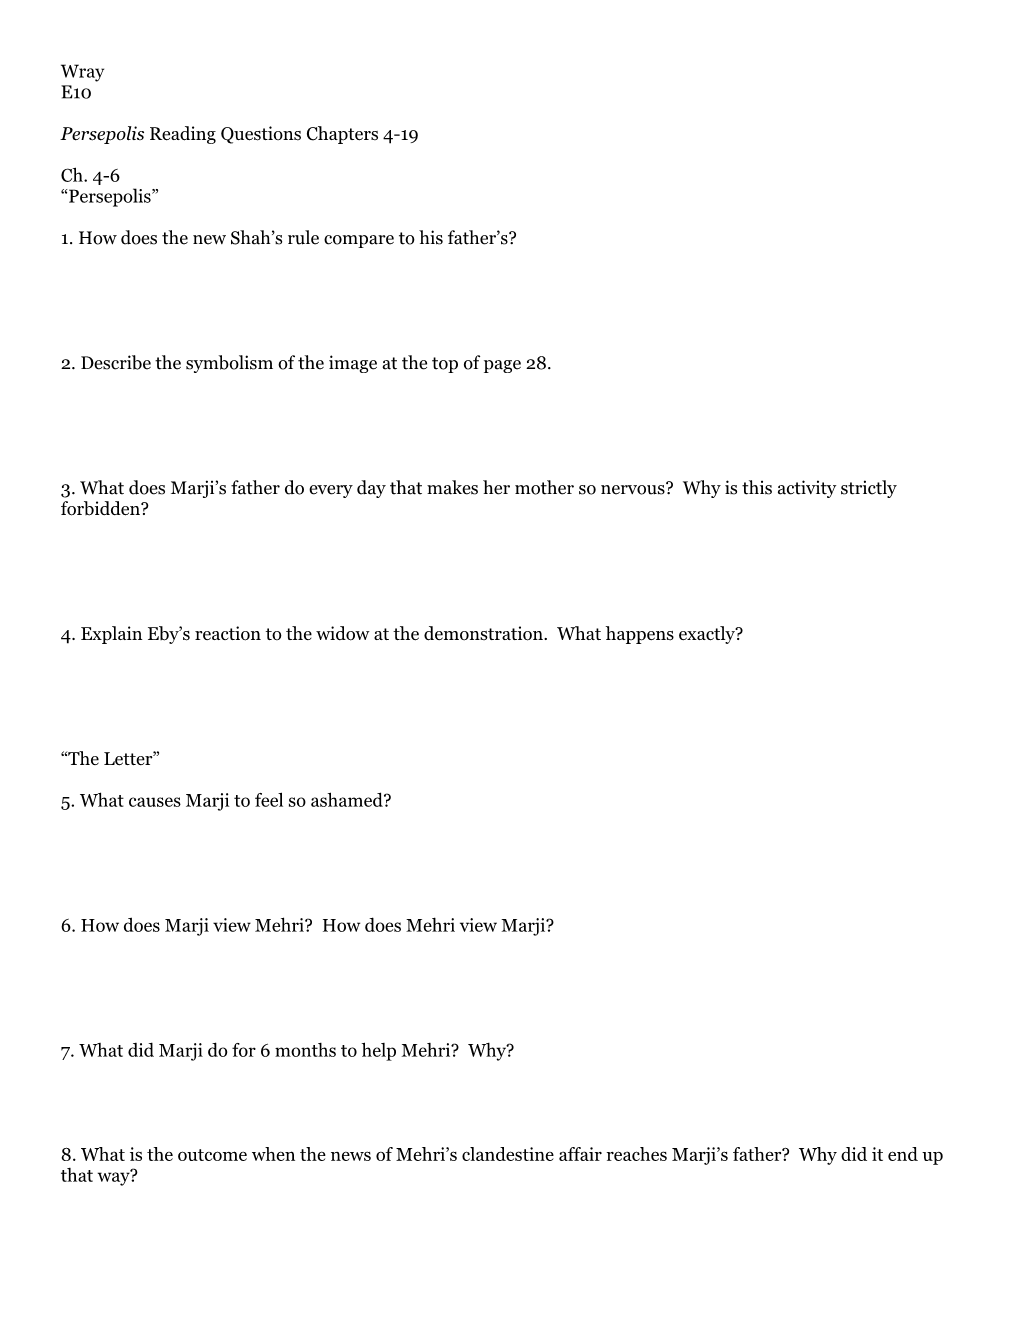 Persepolis Reading Questions Chapters 4-19